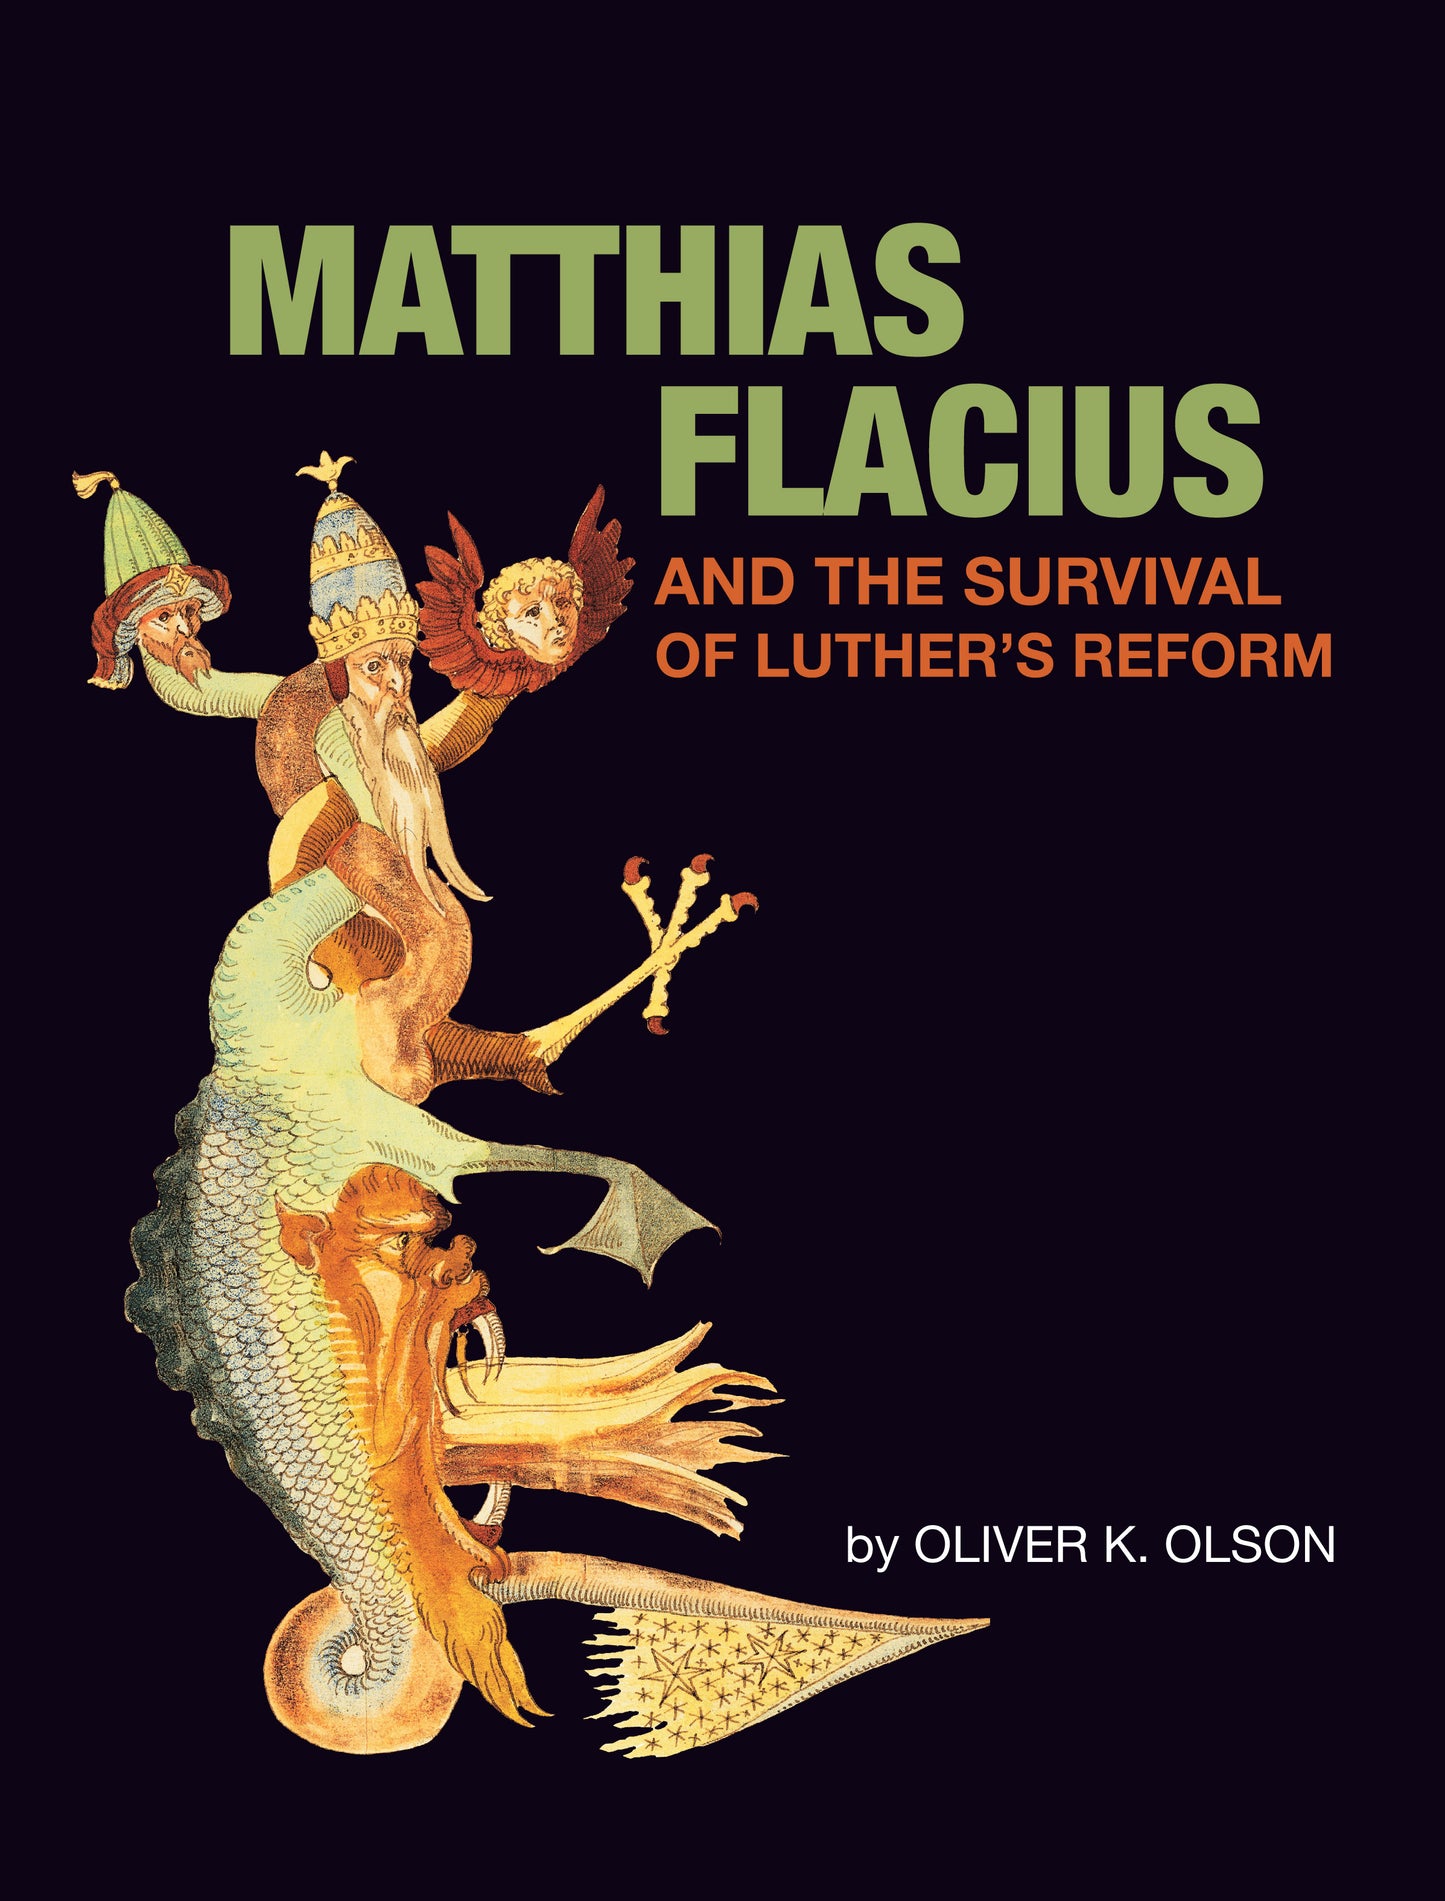 Matthias Flacius and the Survival of Luther's Reform